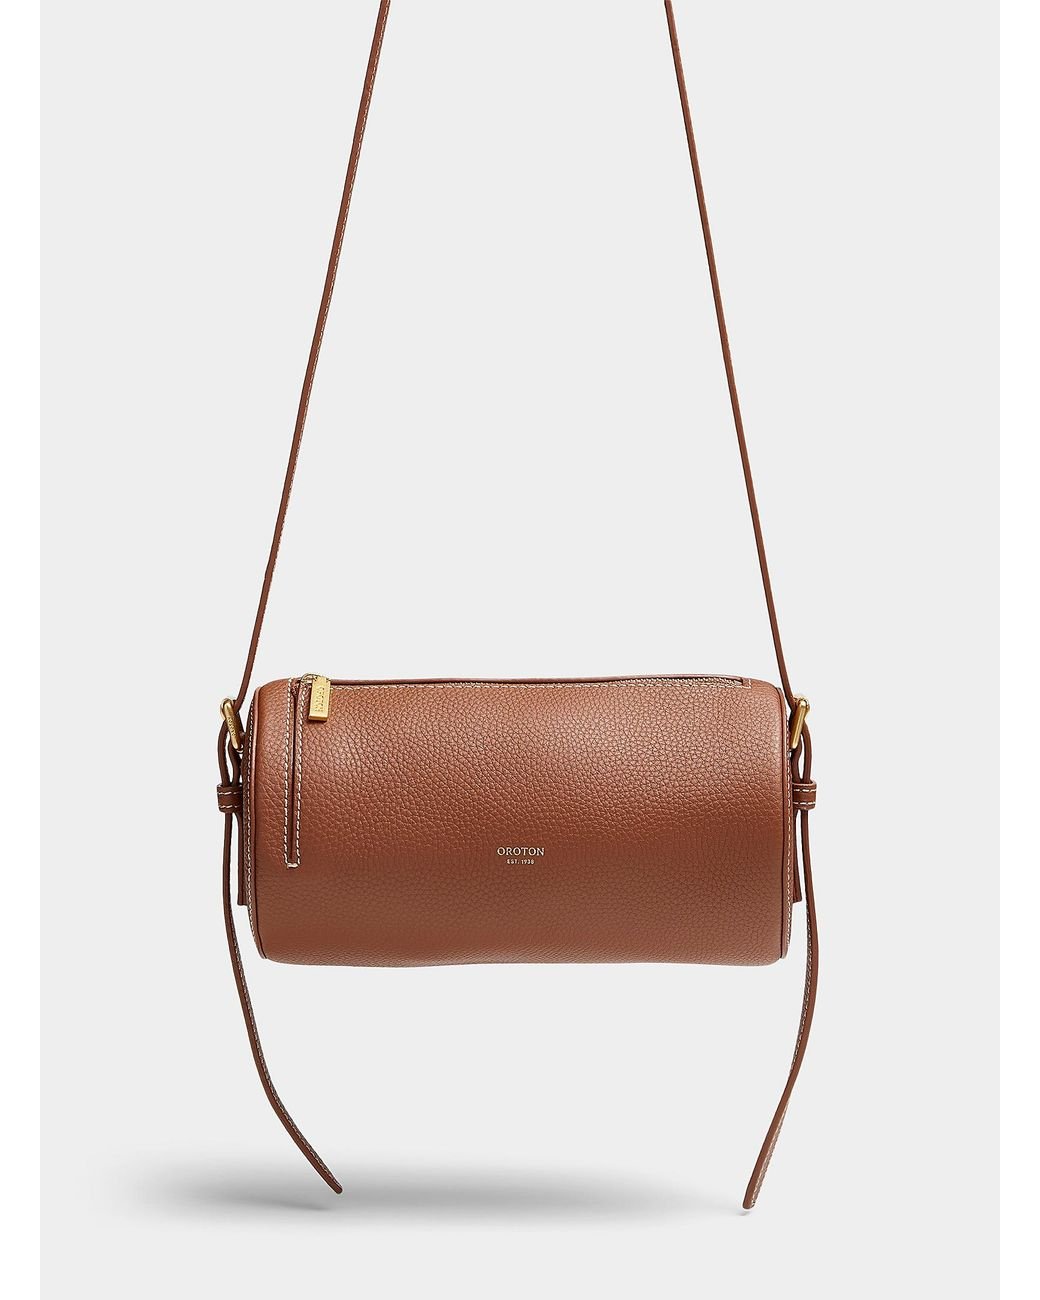 Oroton Margot Leather Cylinder Bag in Brown | Lyst Canada